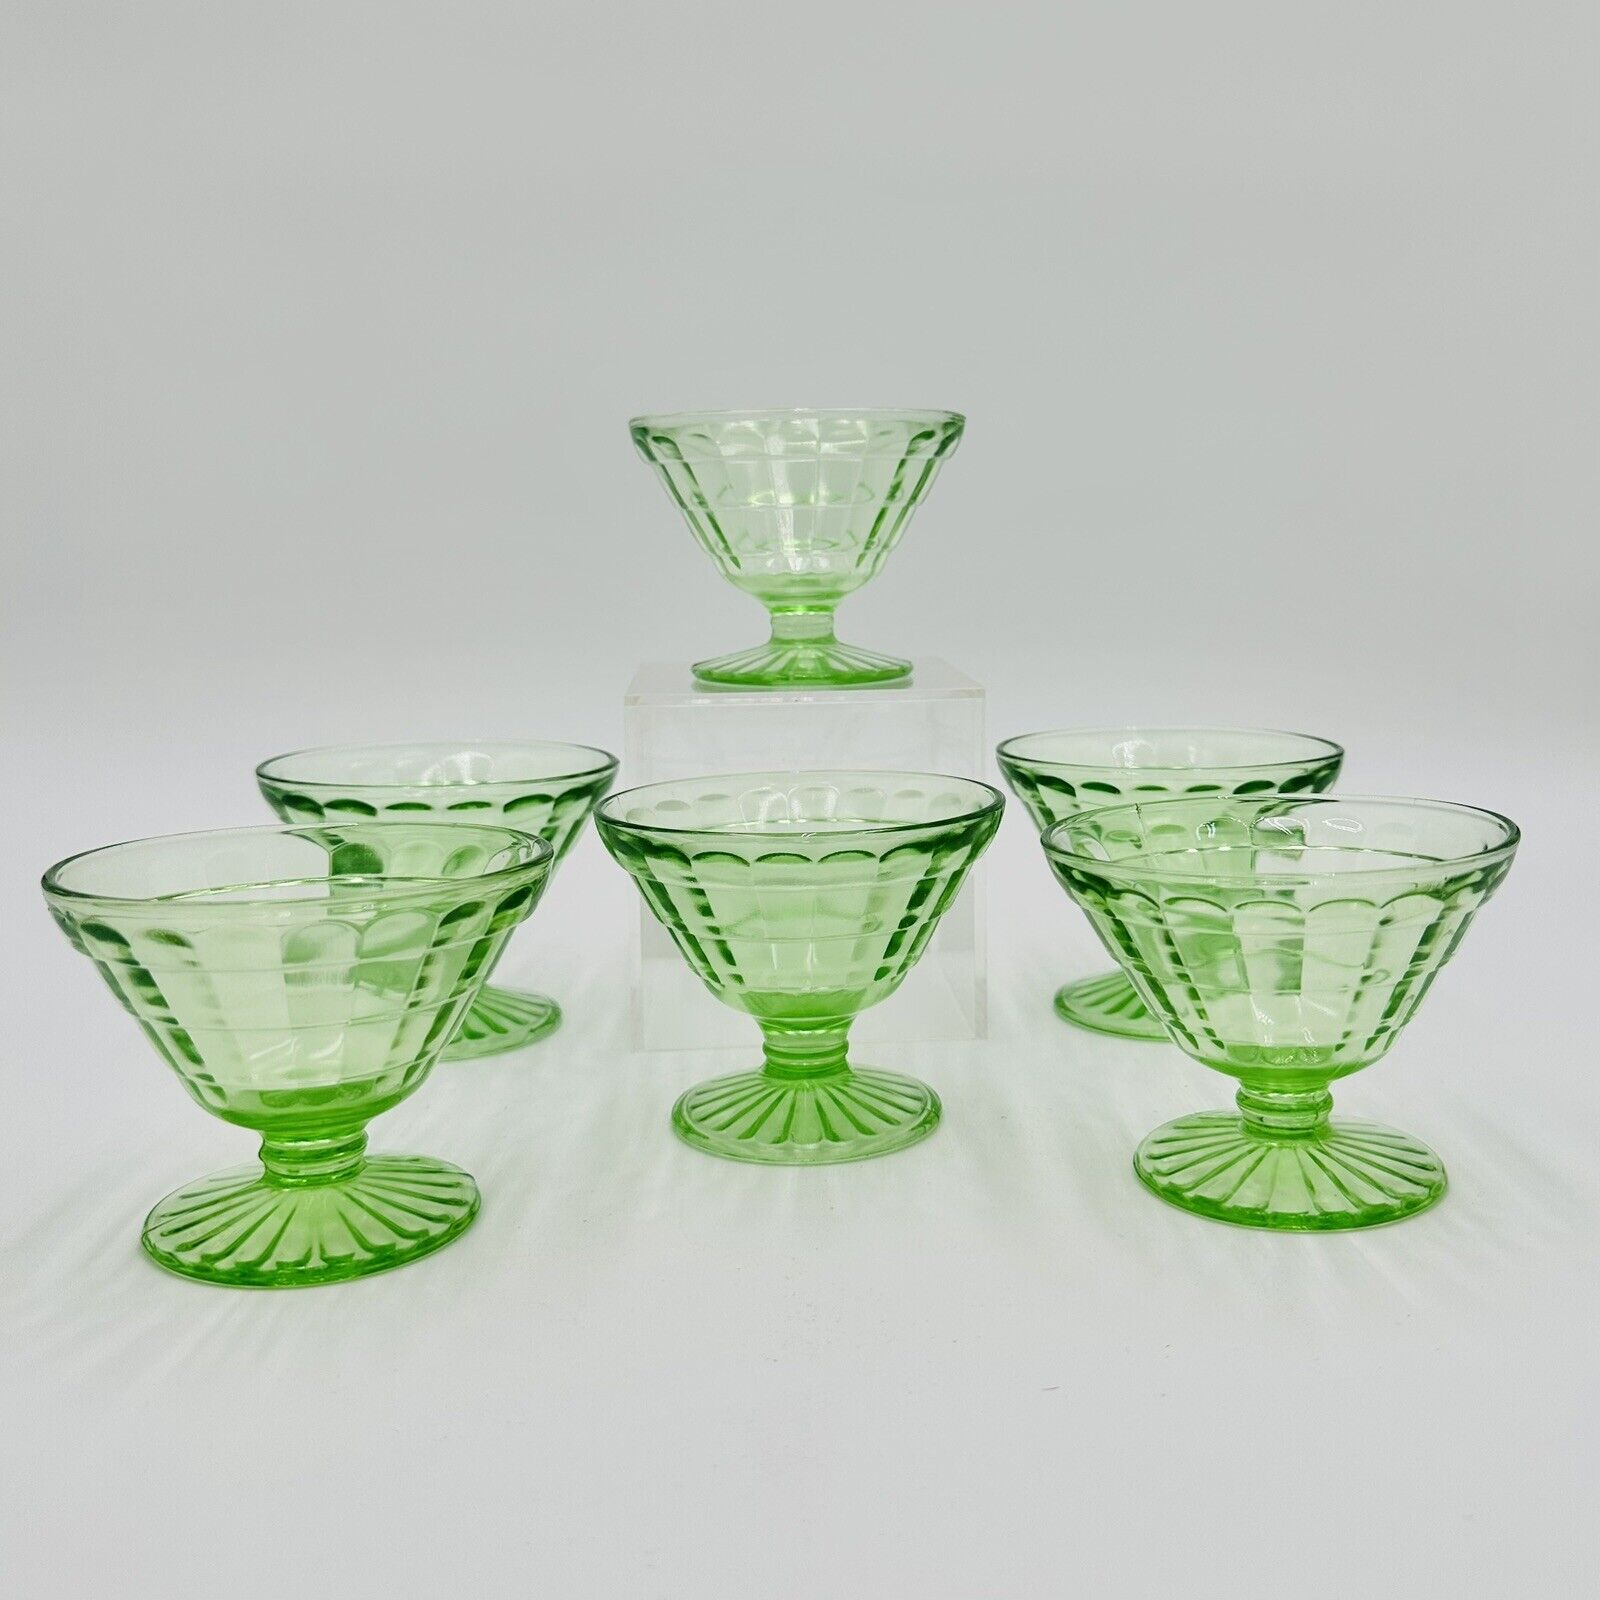 6 Uranium Glass Sundae Dishes Cups Footed Vintage Green Glass 3 inch tall